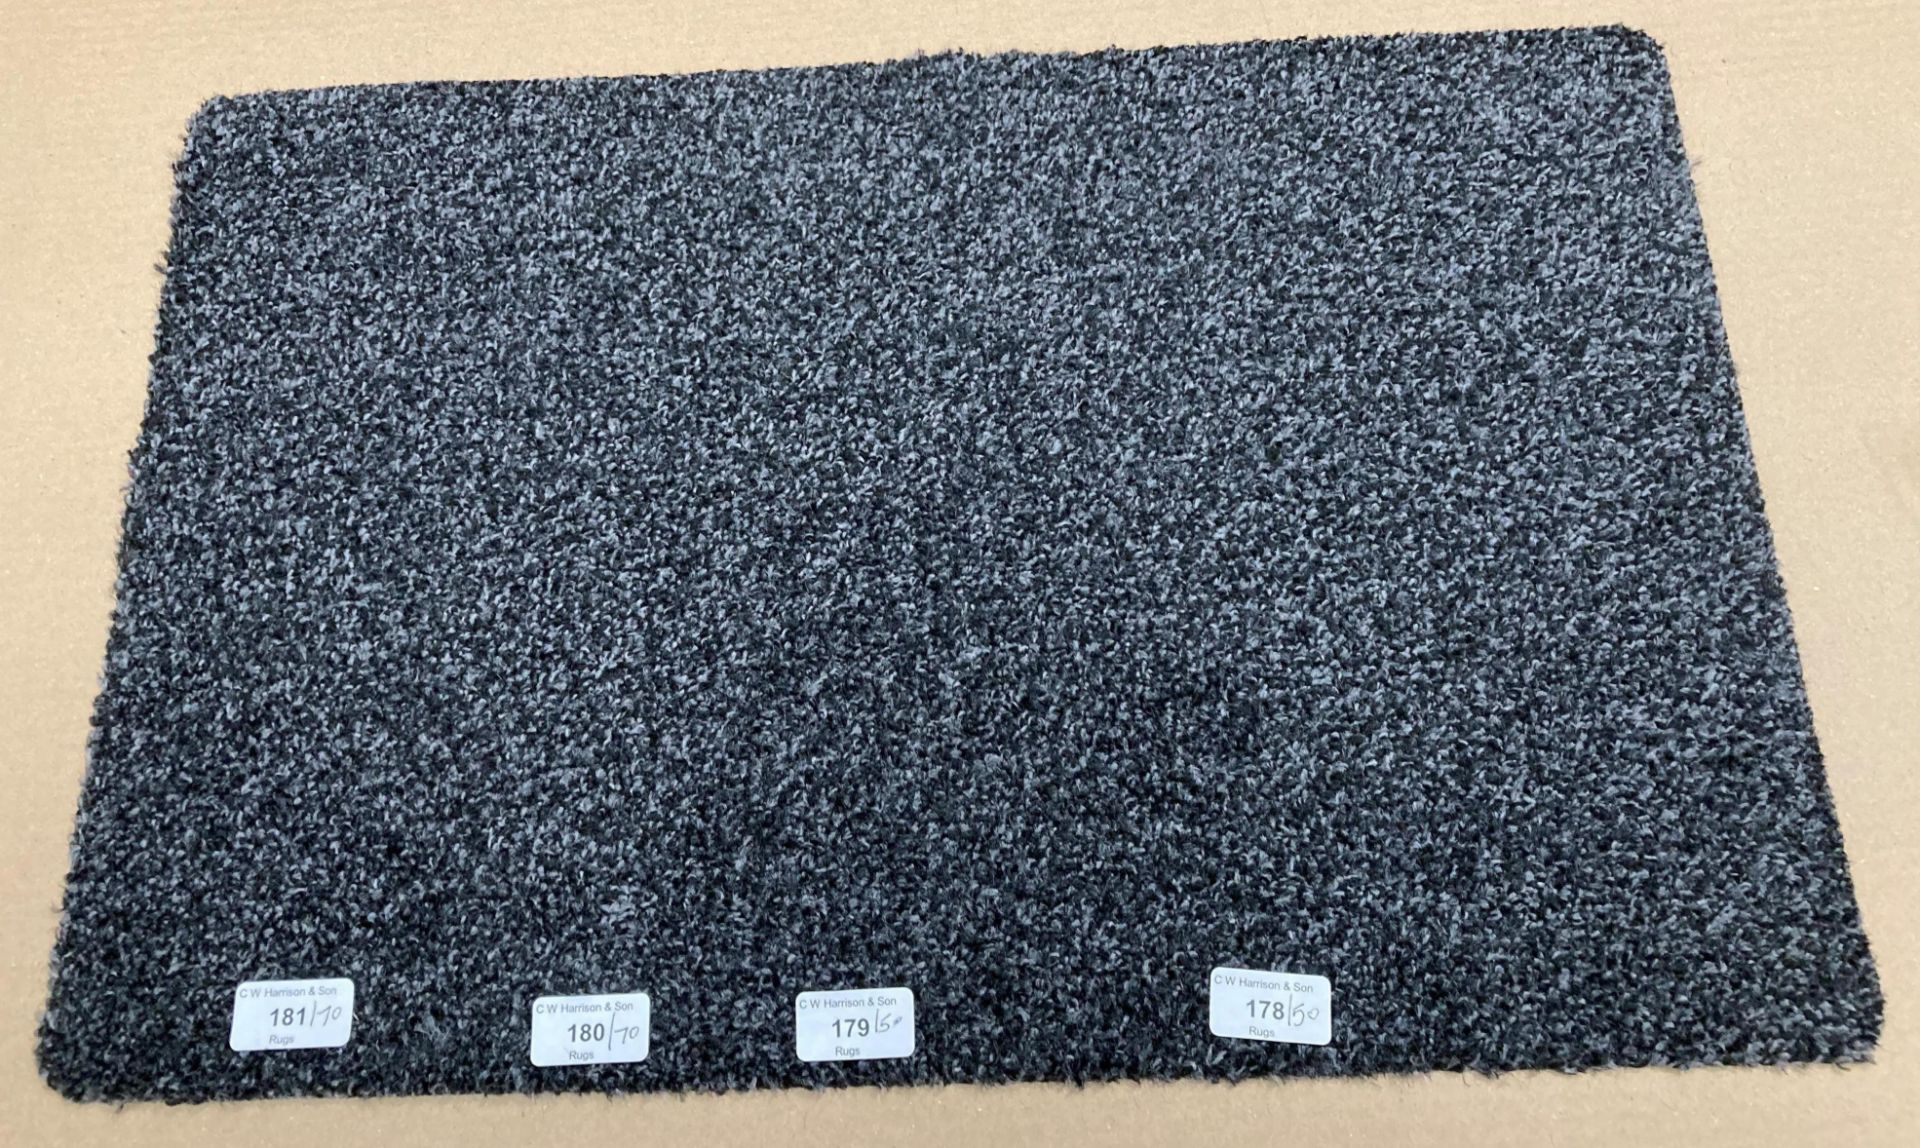 50 x Black speckled mats 60cm x 40cm (F&G3) *Please note the final purchase price is subject to 20%